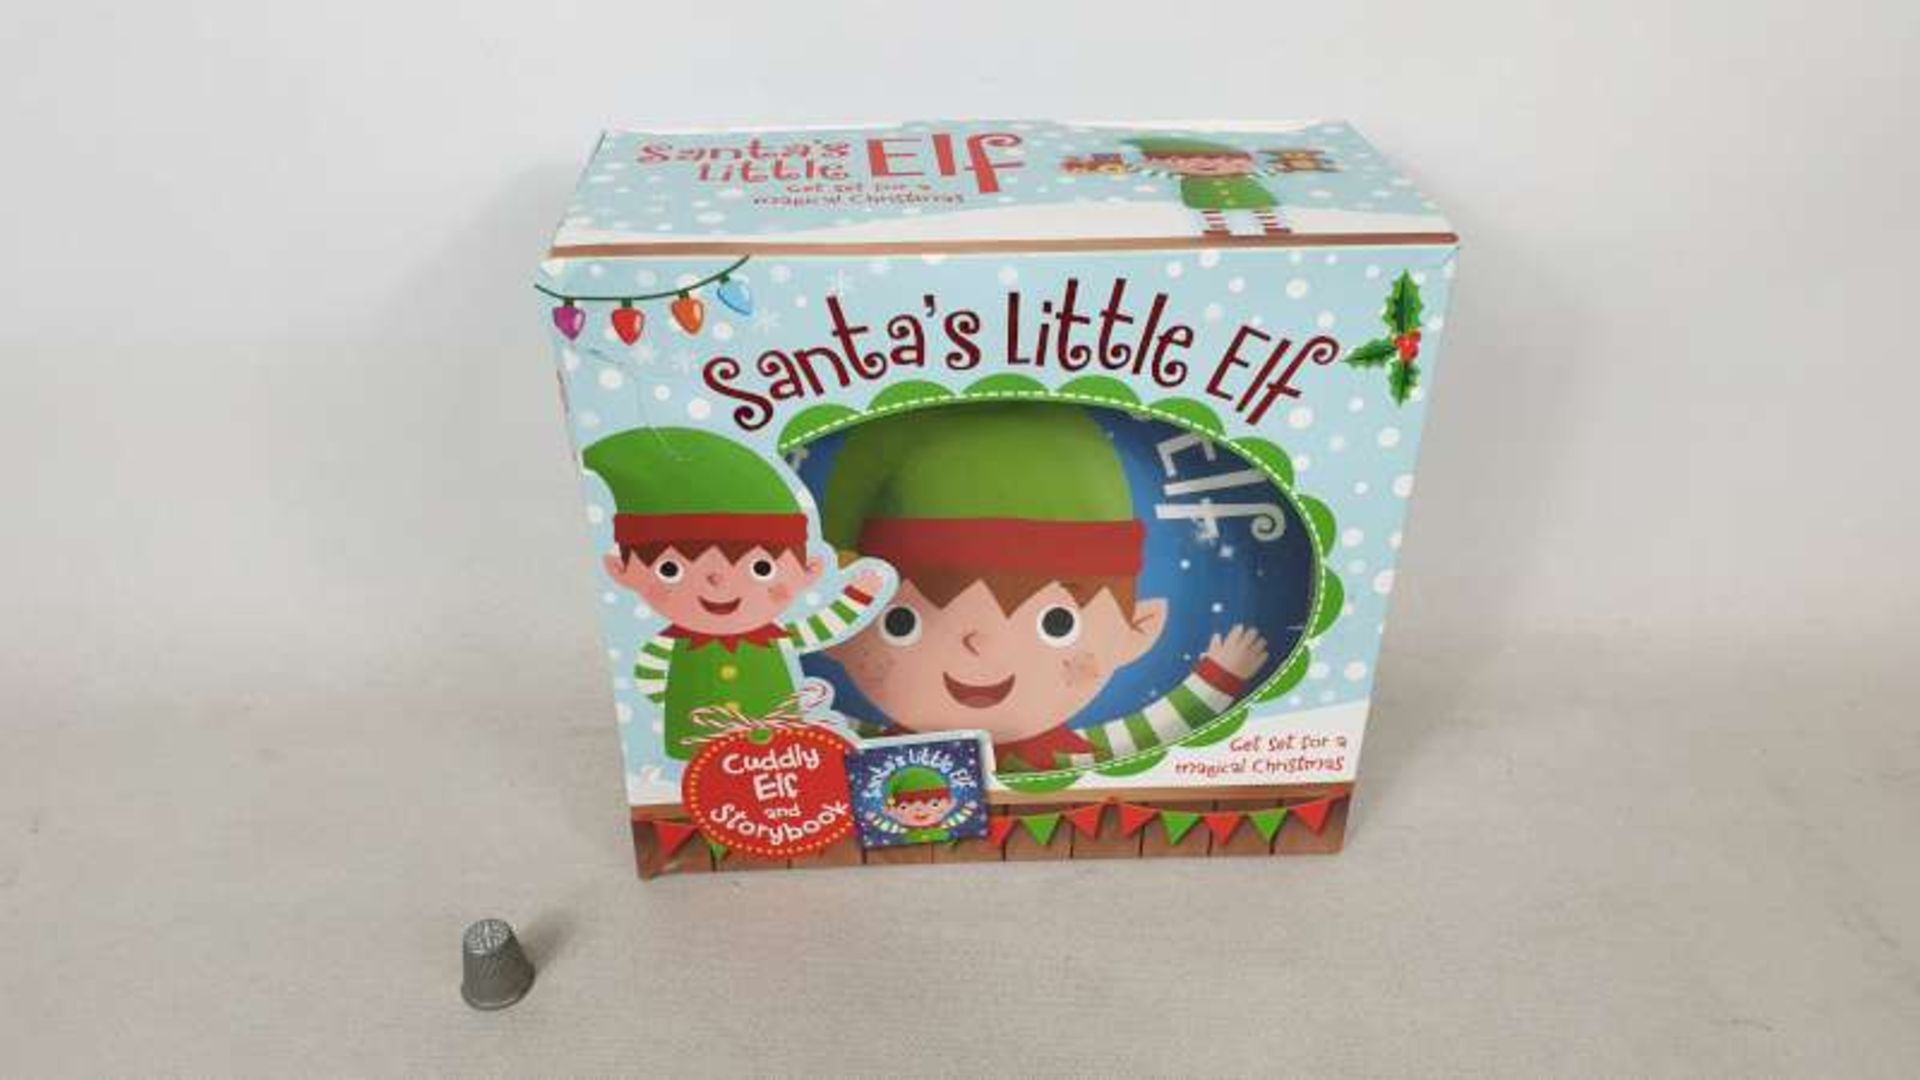 30 X SANTAS LITTLE ELF SETS, EACH SET CONTAINS CUDDLY ELF AND STORYBOOK IN 3 BOXES